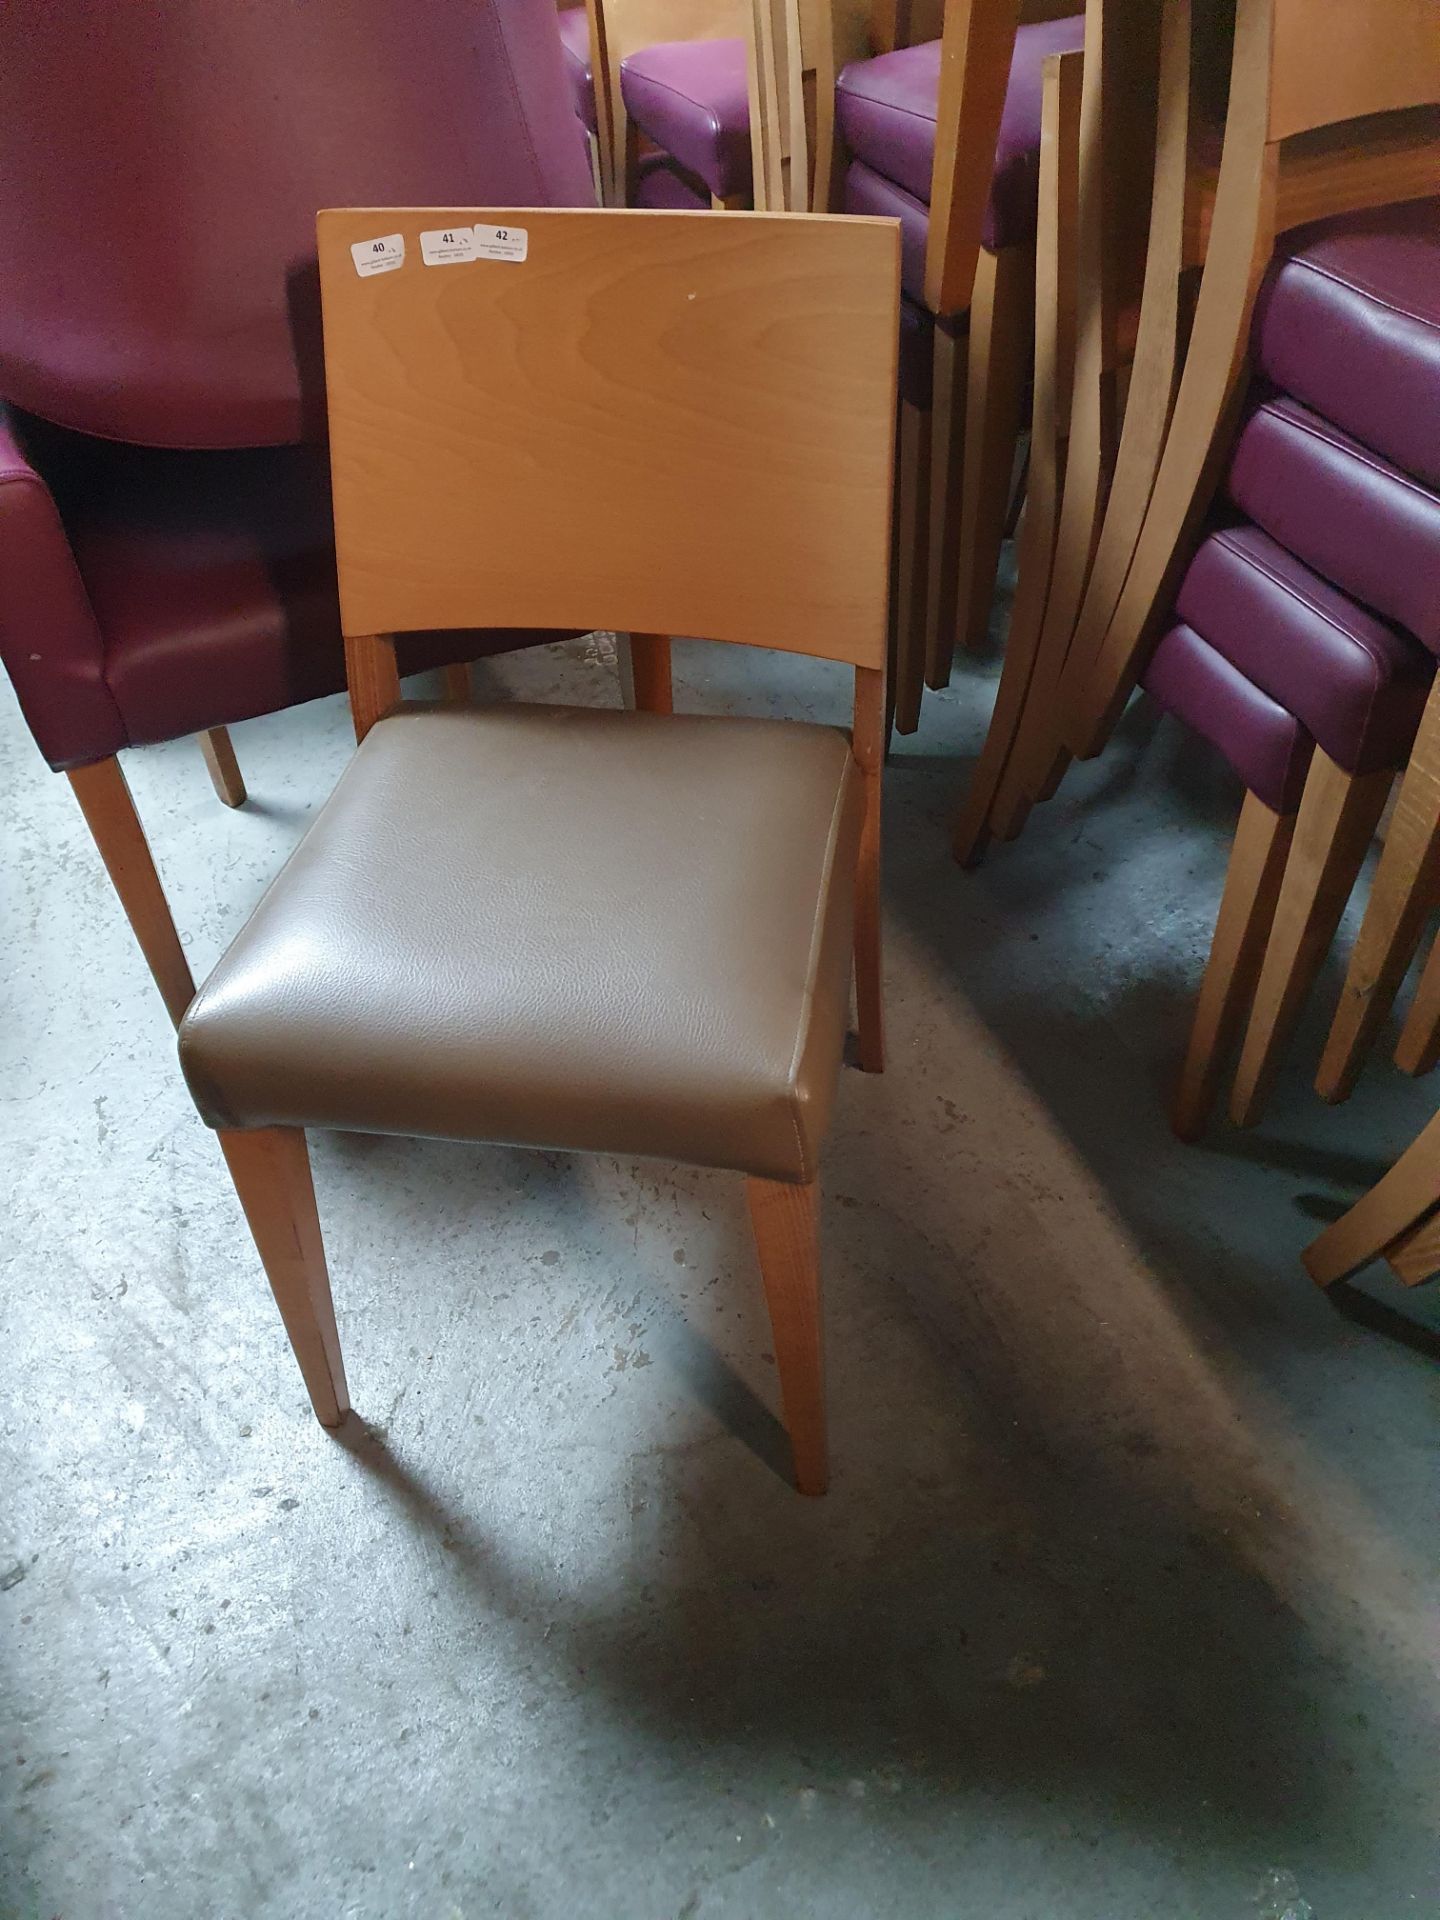 * 8 x chairs - brown pads